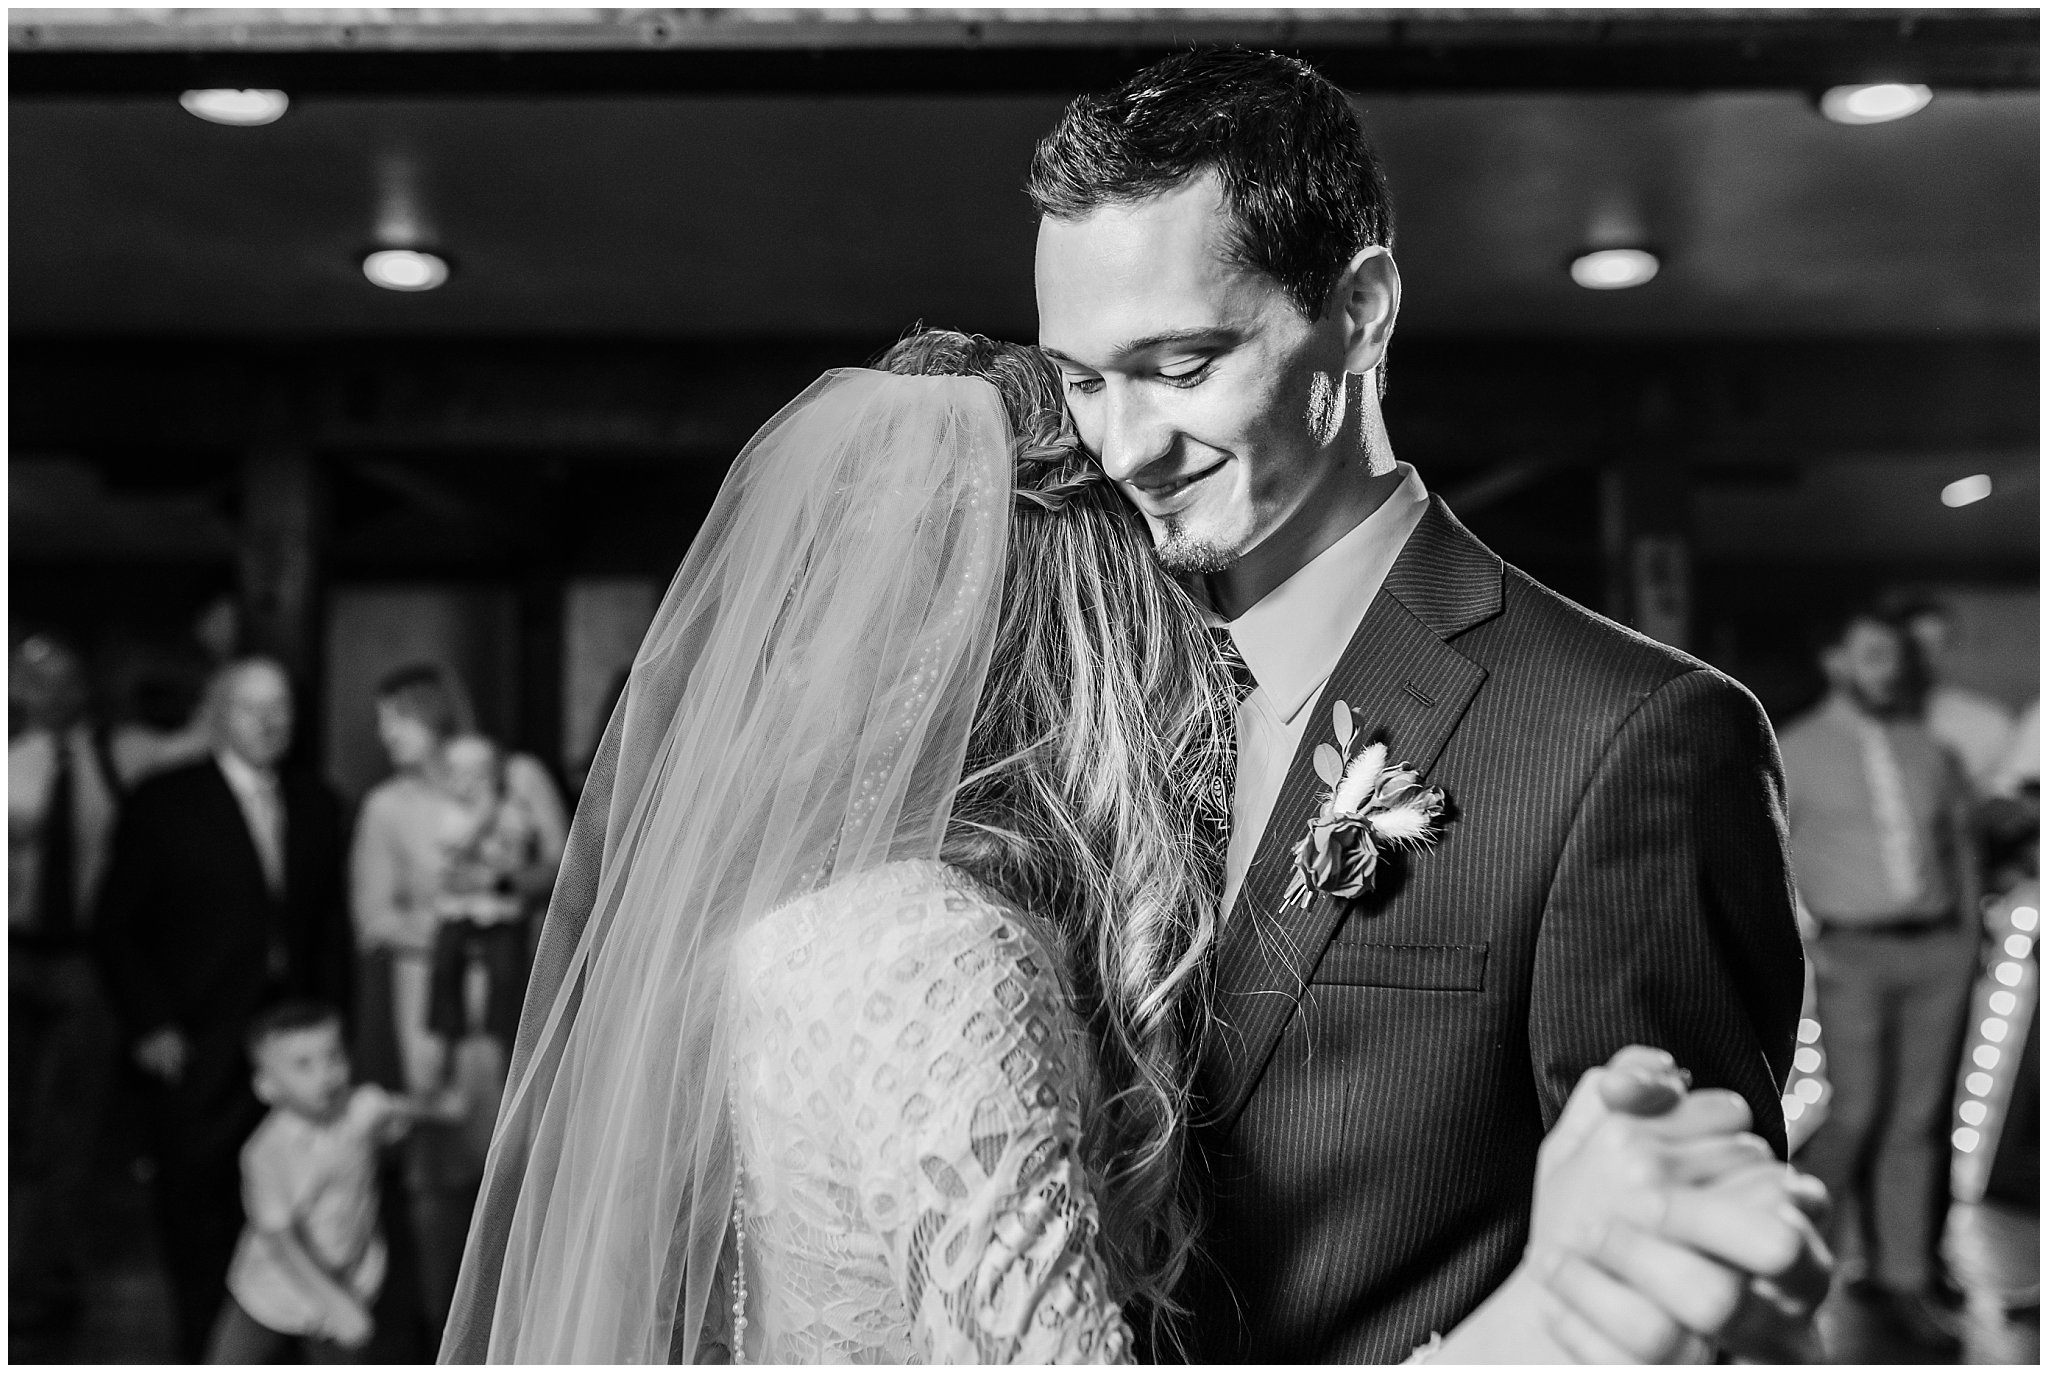 First dance during reception in the barn | Wadley Farms Summer Wedding | Jessie and Dallin Photography